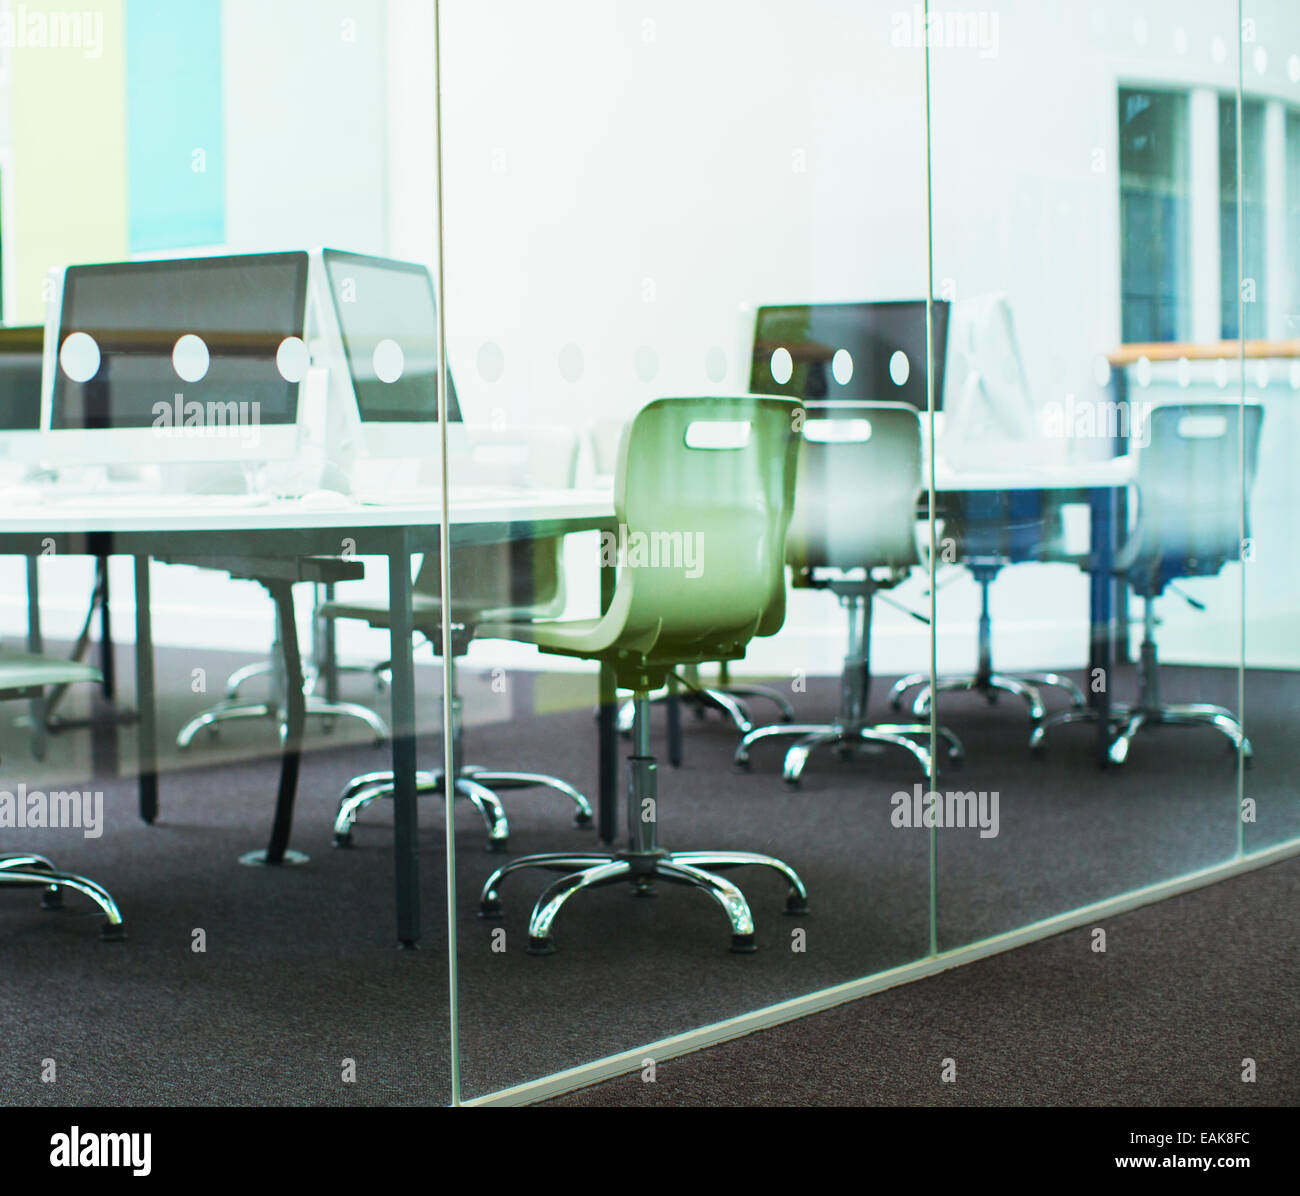 Empty classroom with modern glass walls Stock Photo